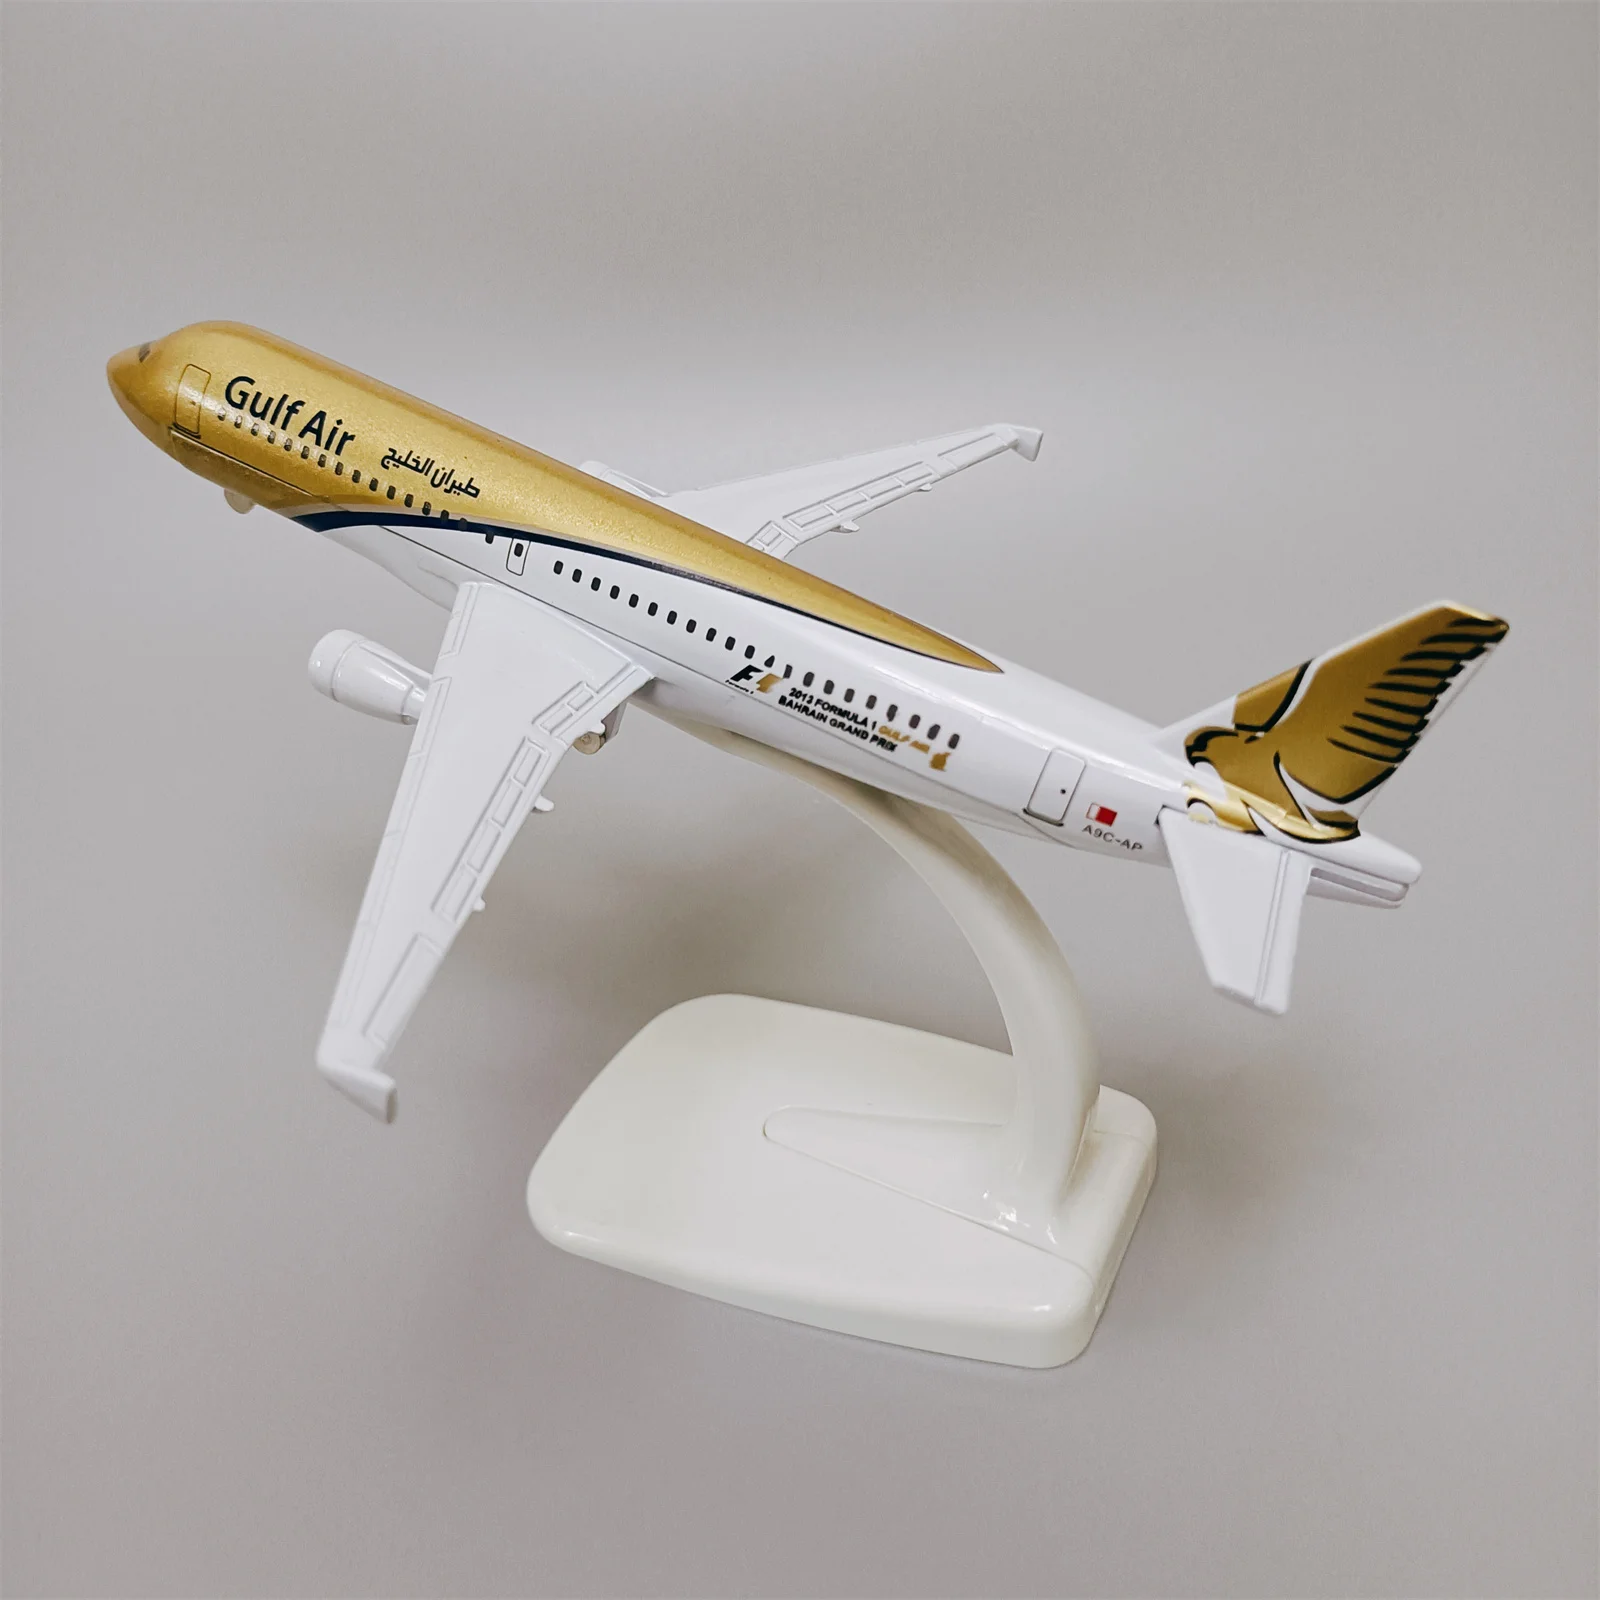 

16cm Alloy Metal GULF Air A320 Airlines Airplane Model GULF Airbus 320 Airways Diecast Air Plane Model w Stand Aircraft Gifts